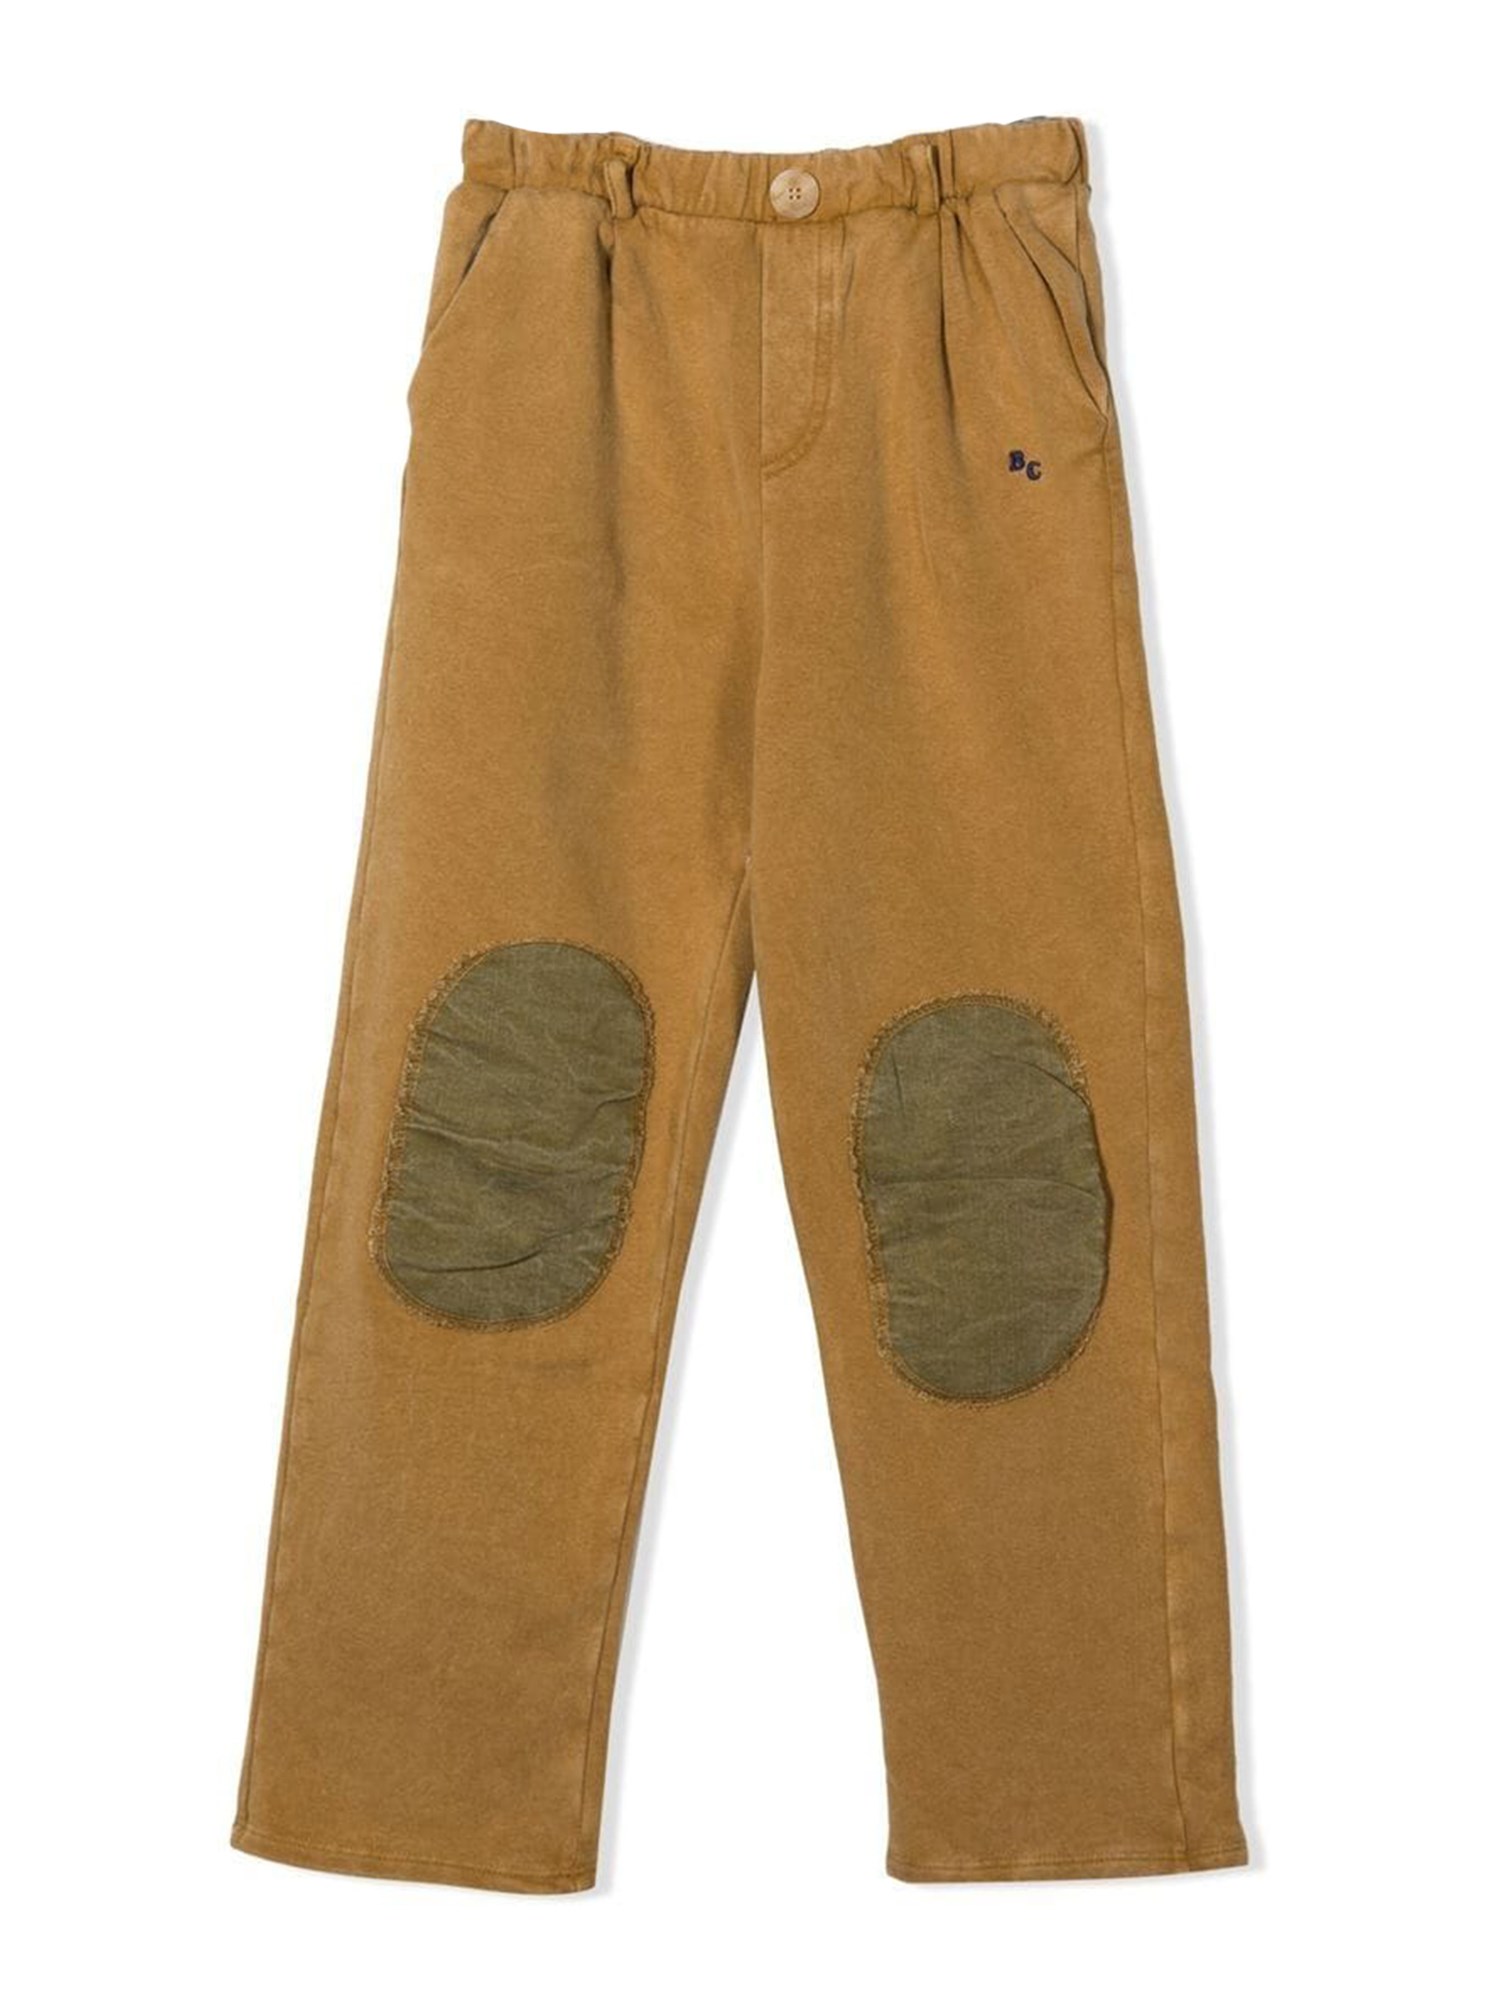 bobo choses knee patches jogging pants